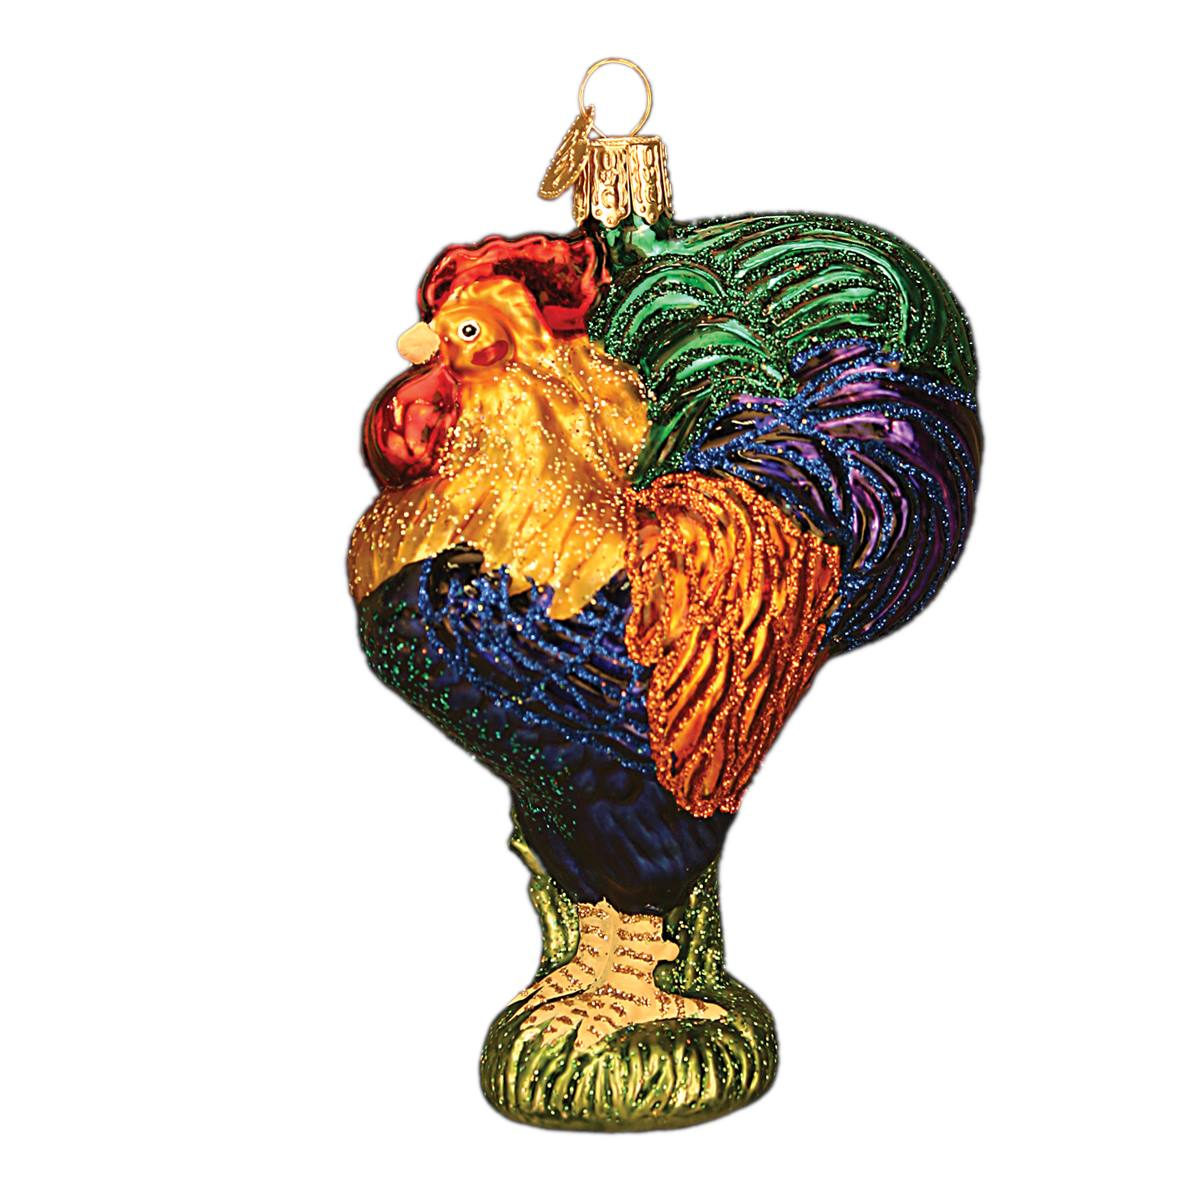 Heirloom Rooster Ornament